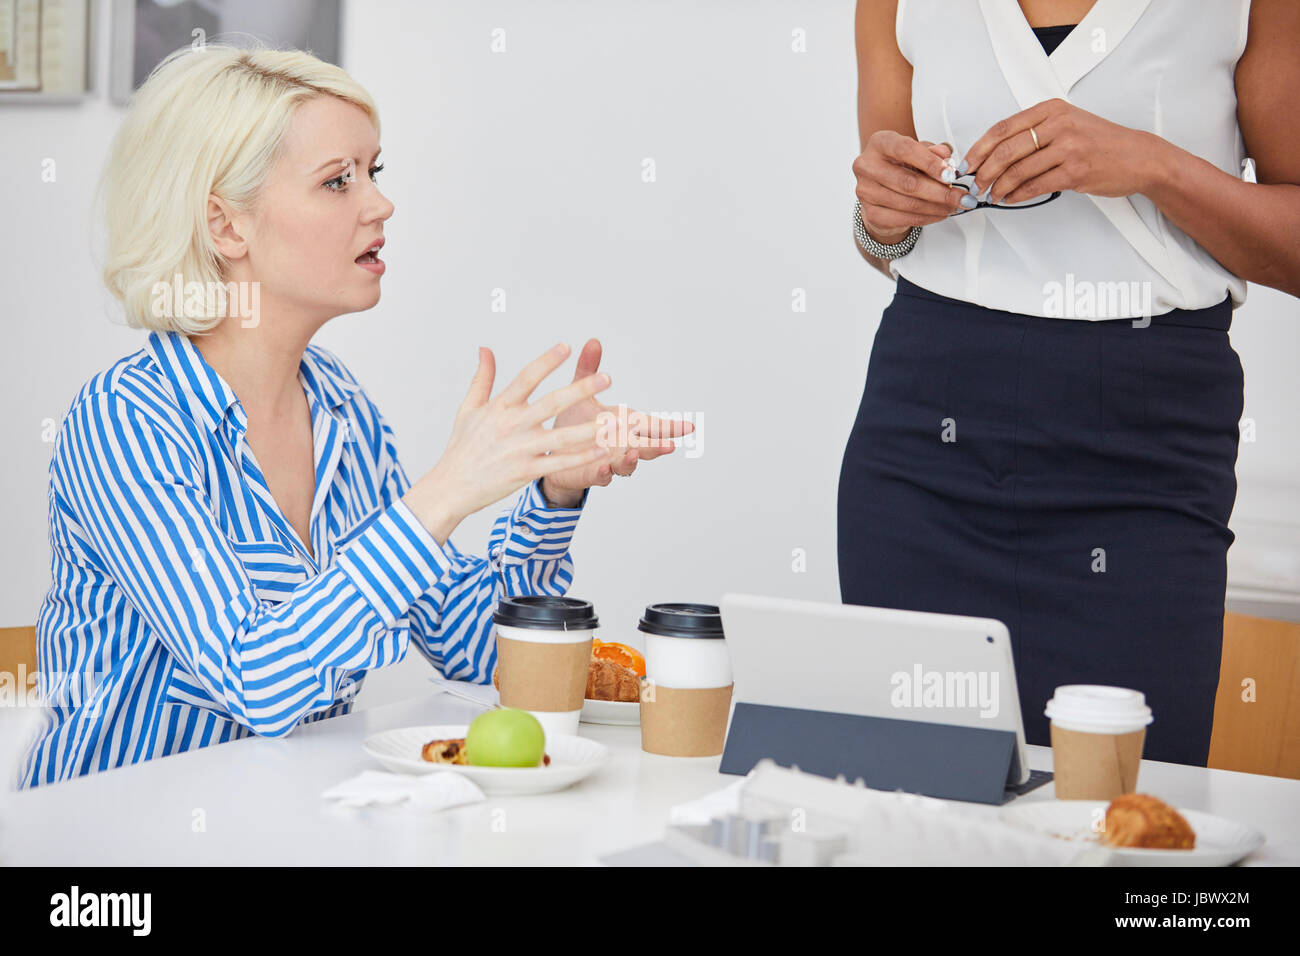 Female architect explaining architectural model on table in meeting Stock Photo